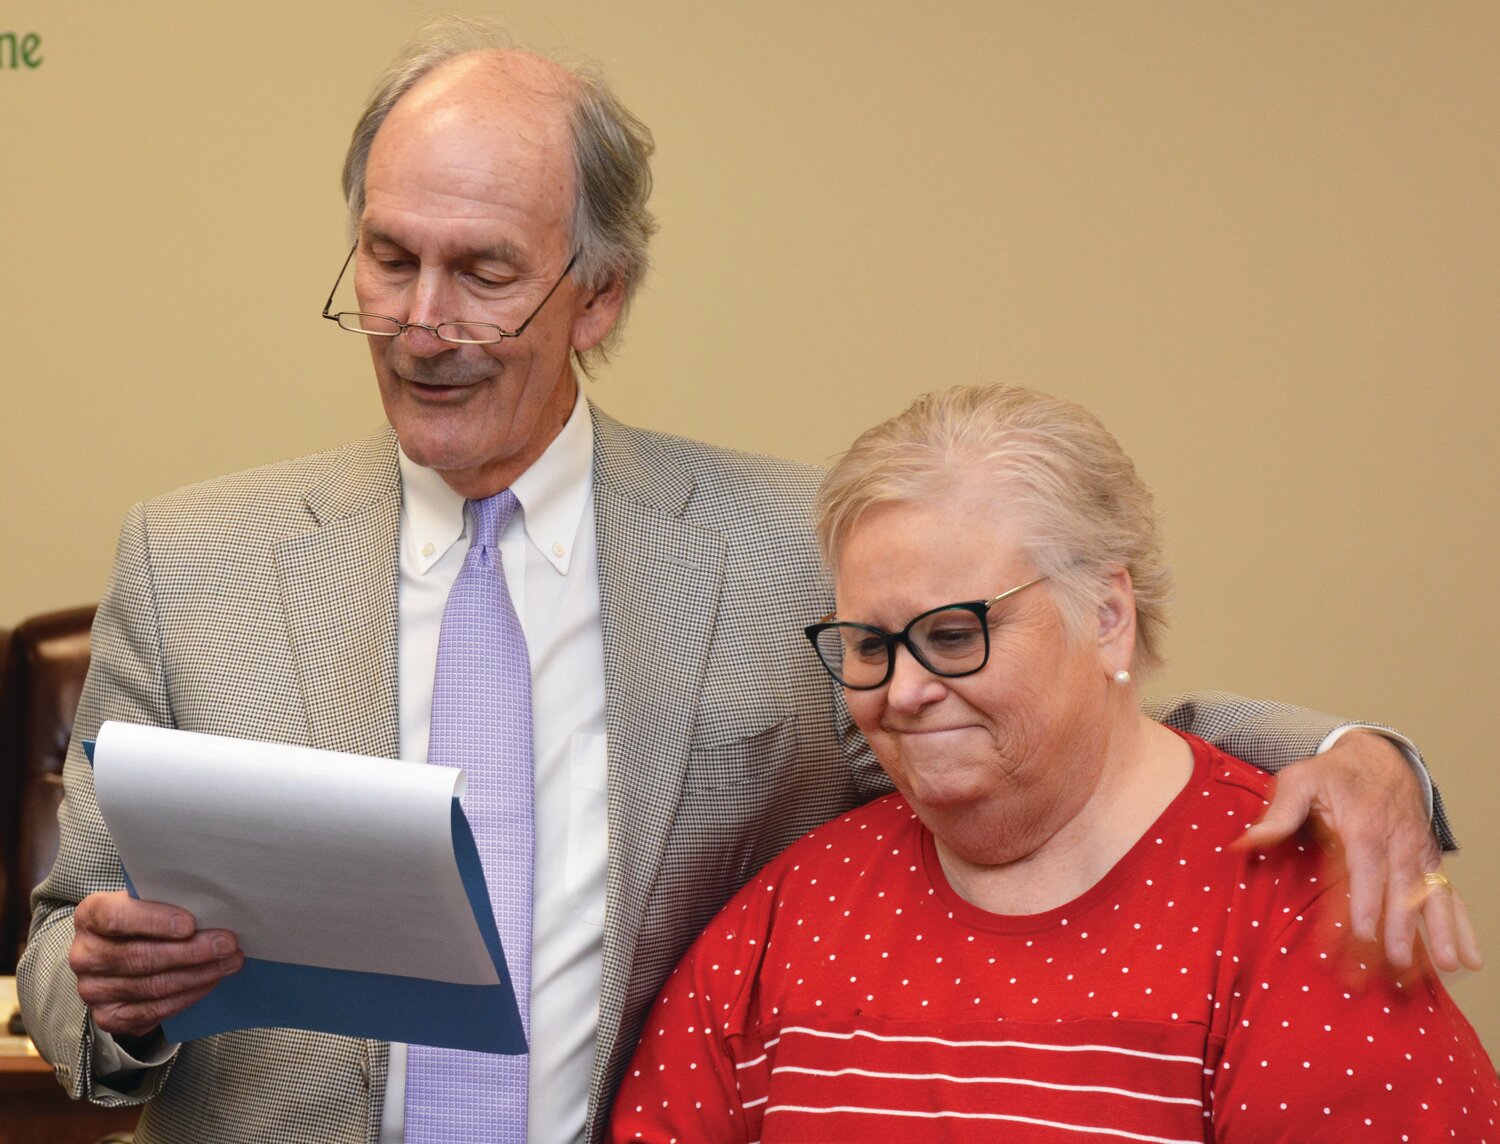 Paris Mayor Craig Smith, left, declared May 22 to May 29 as Nancy Zeman Week in Paris and encourages all citizens to express their gratitude for all she has done for the community. Zeman, right, is stepping down from her position as publisher of The Prairie Press May 31 and entering semi-retirement.